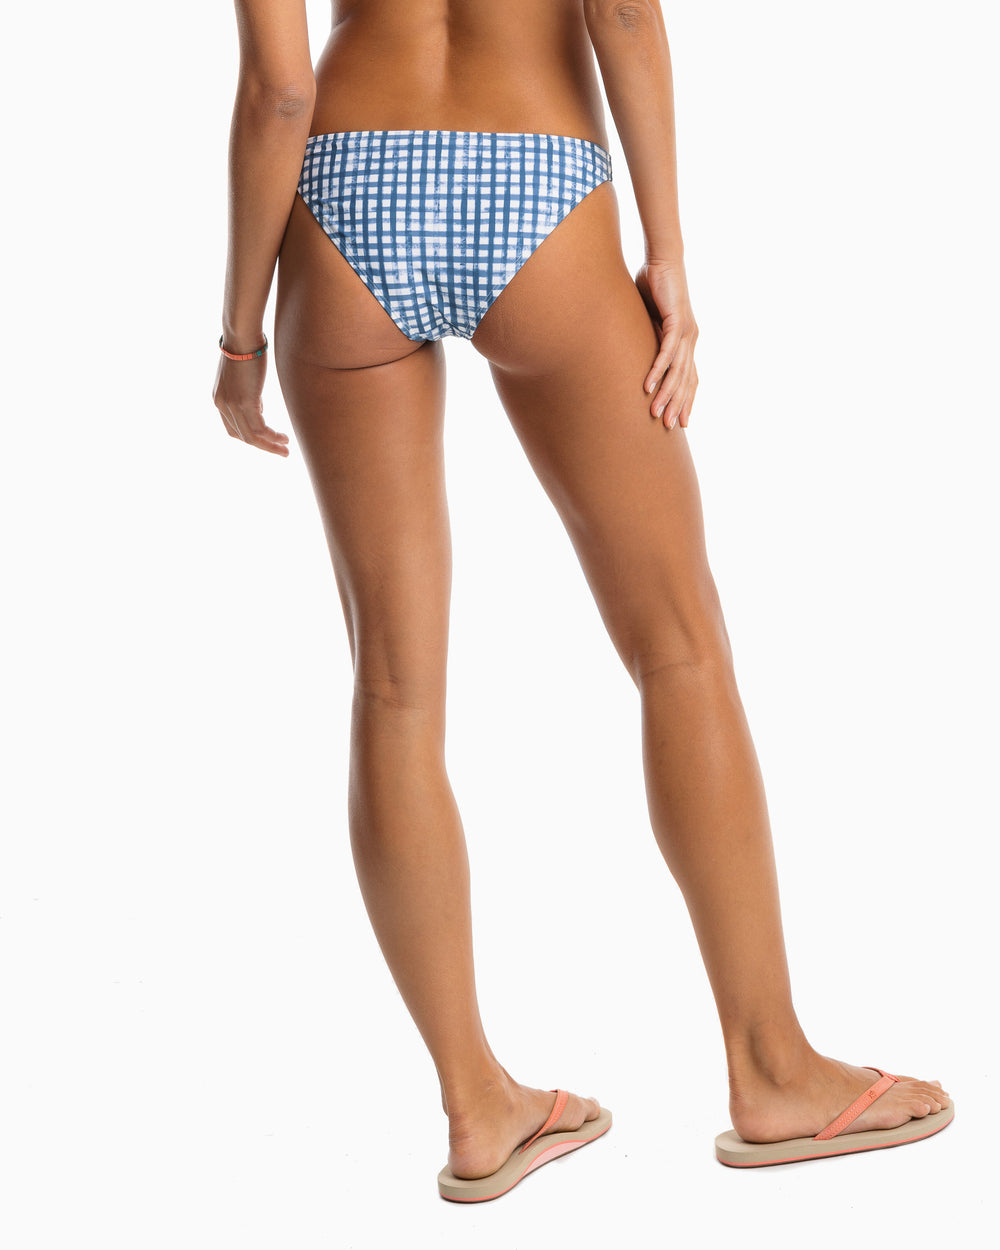 The back view of the Women's Bikini Bottom by Southern Tide - Seven Seas Blue Painted Gingham